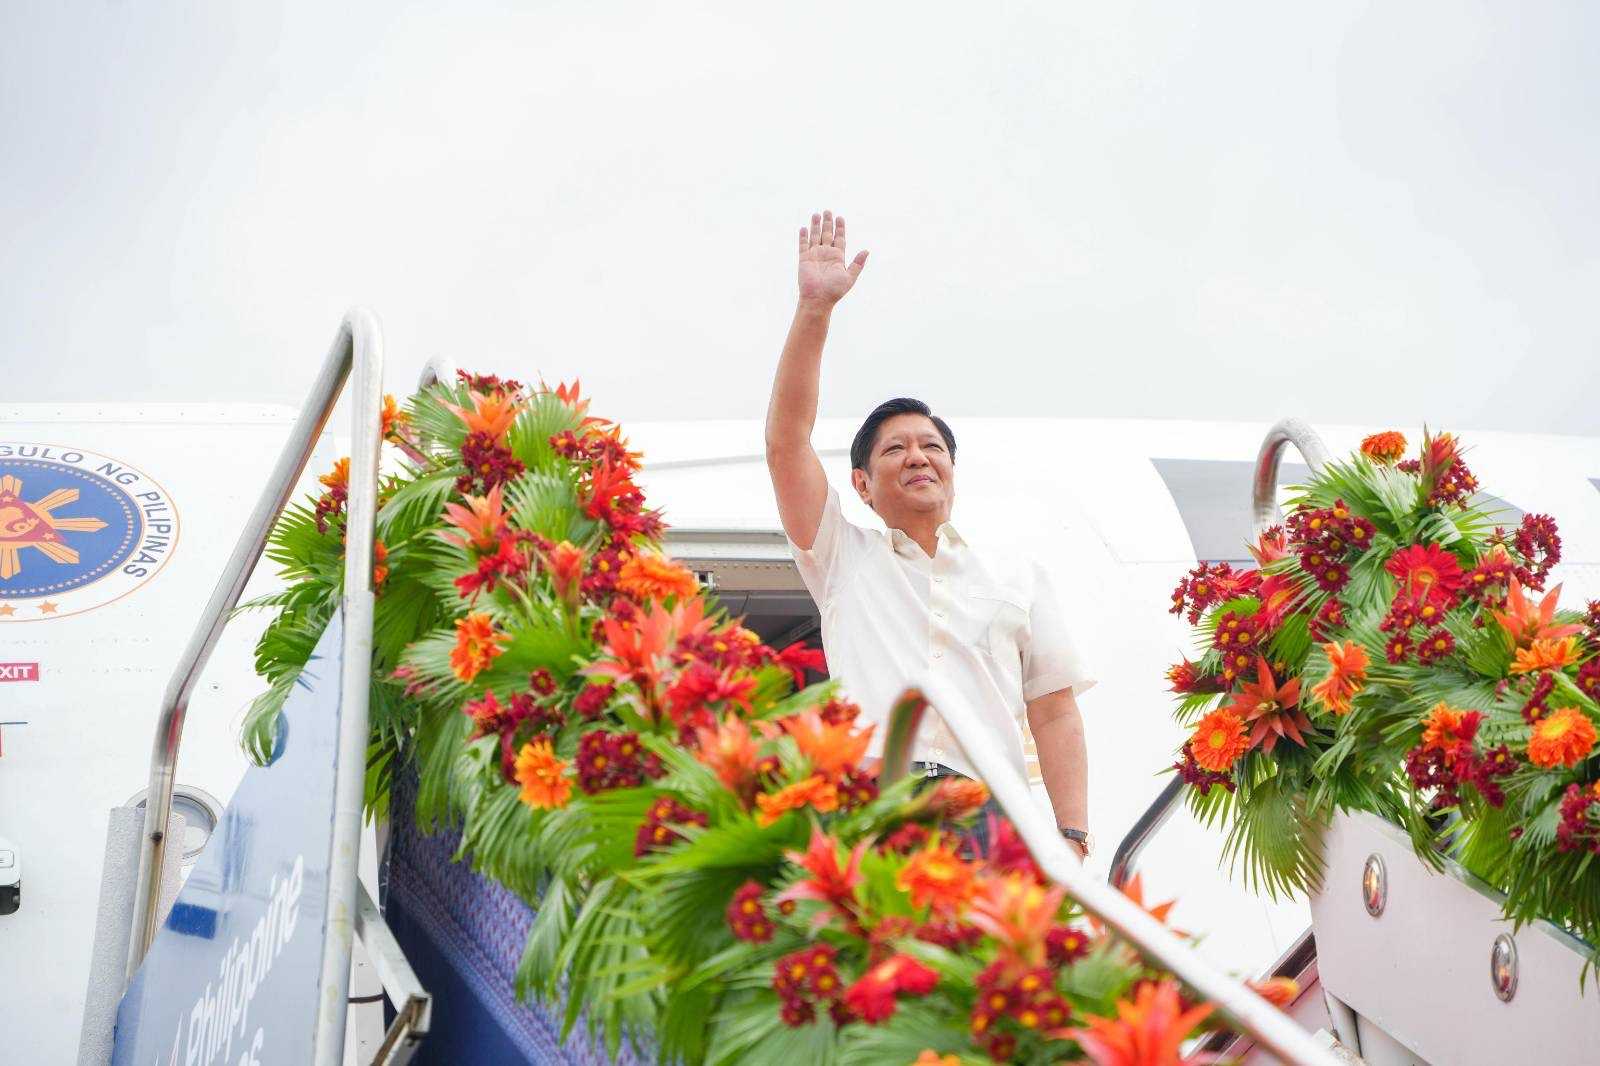 Prez Marcos says he entered politics for family's survival, legacy